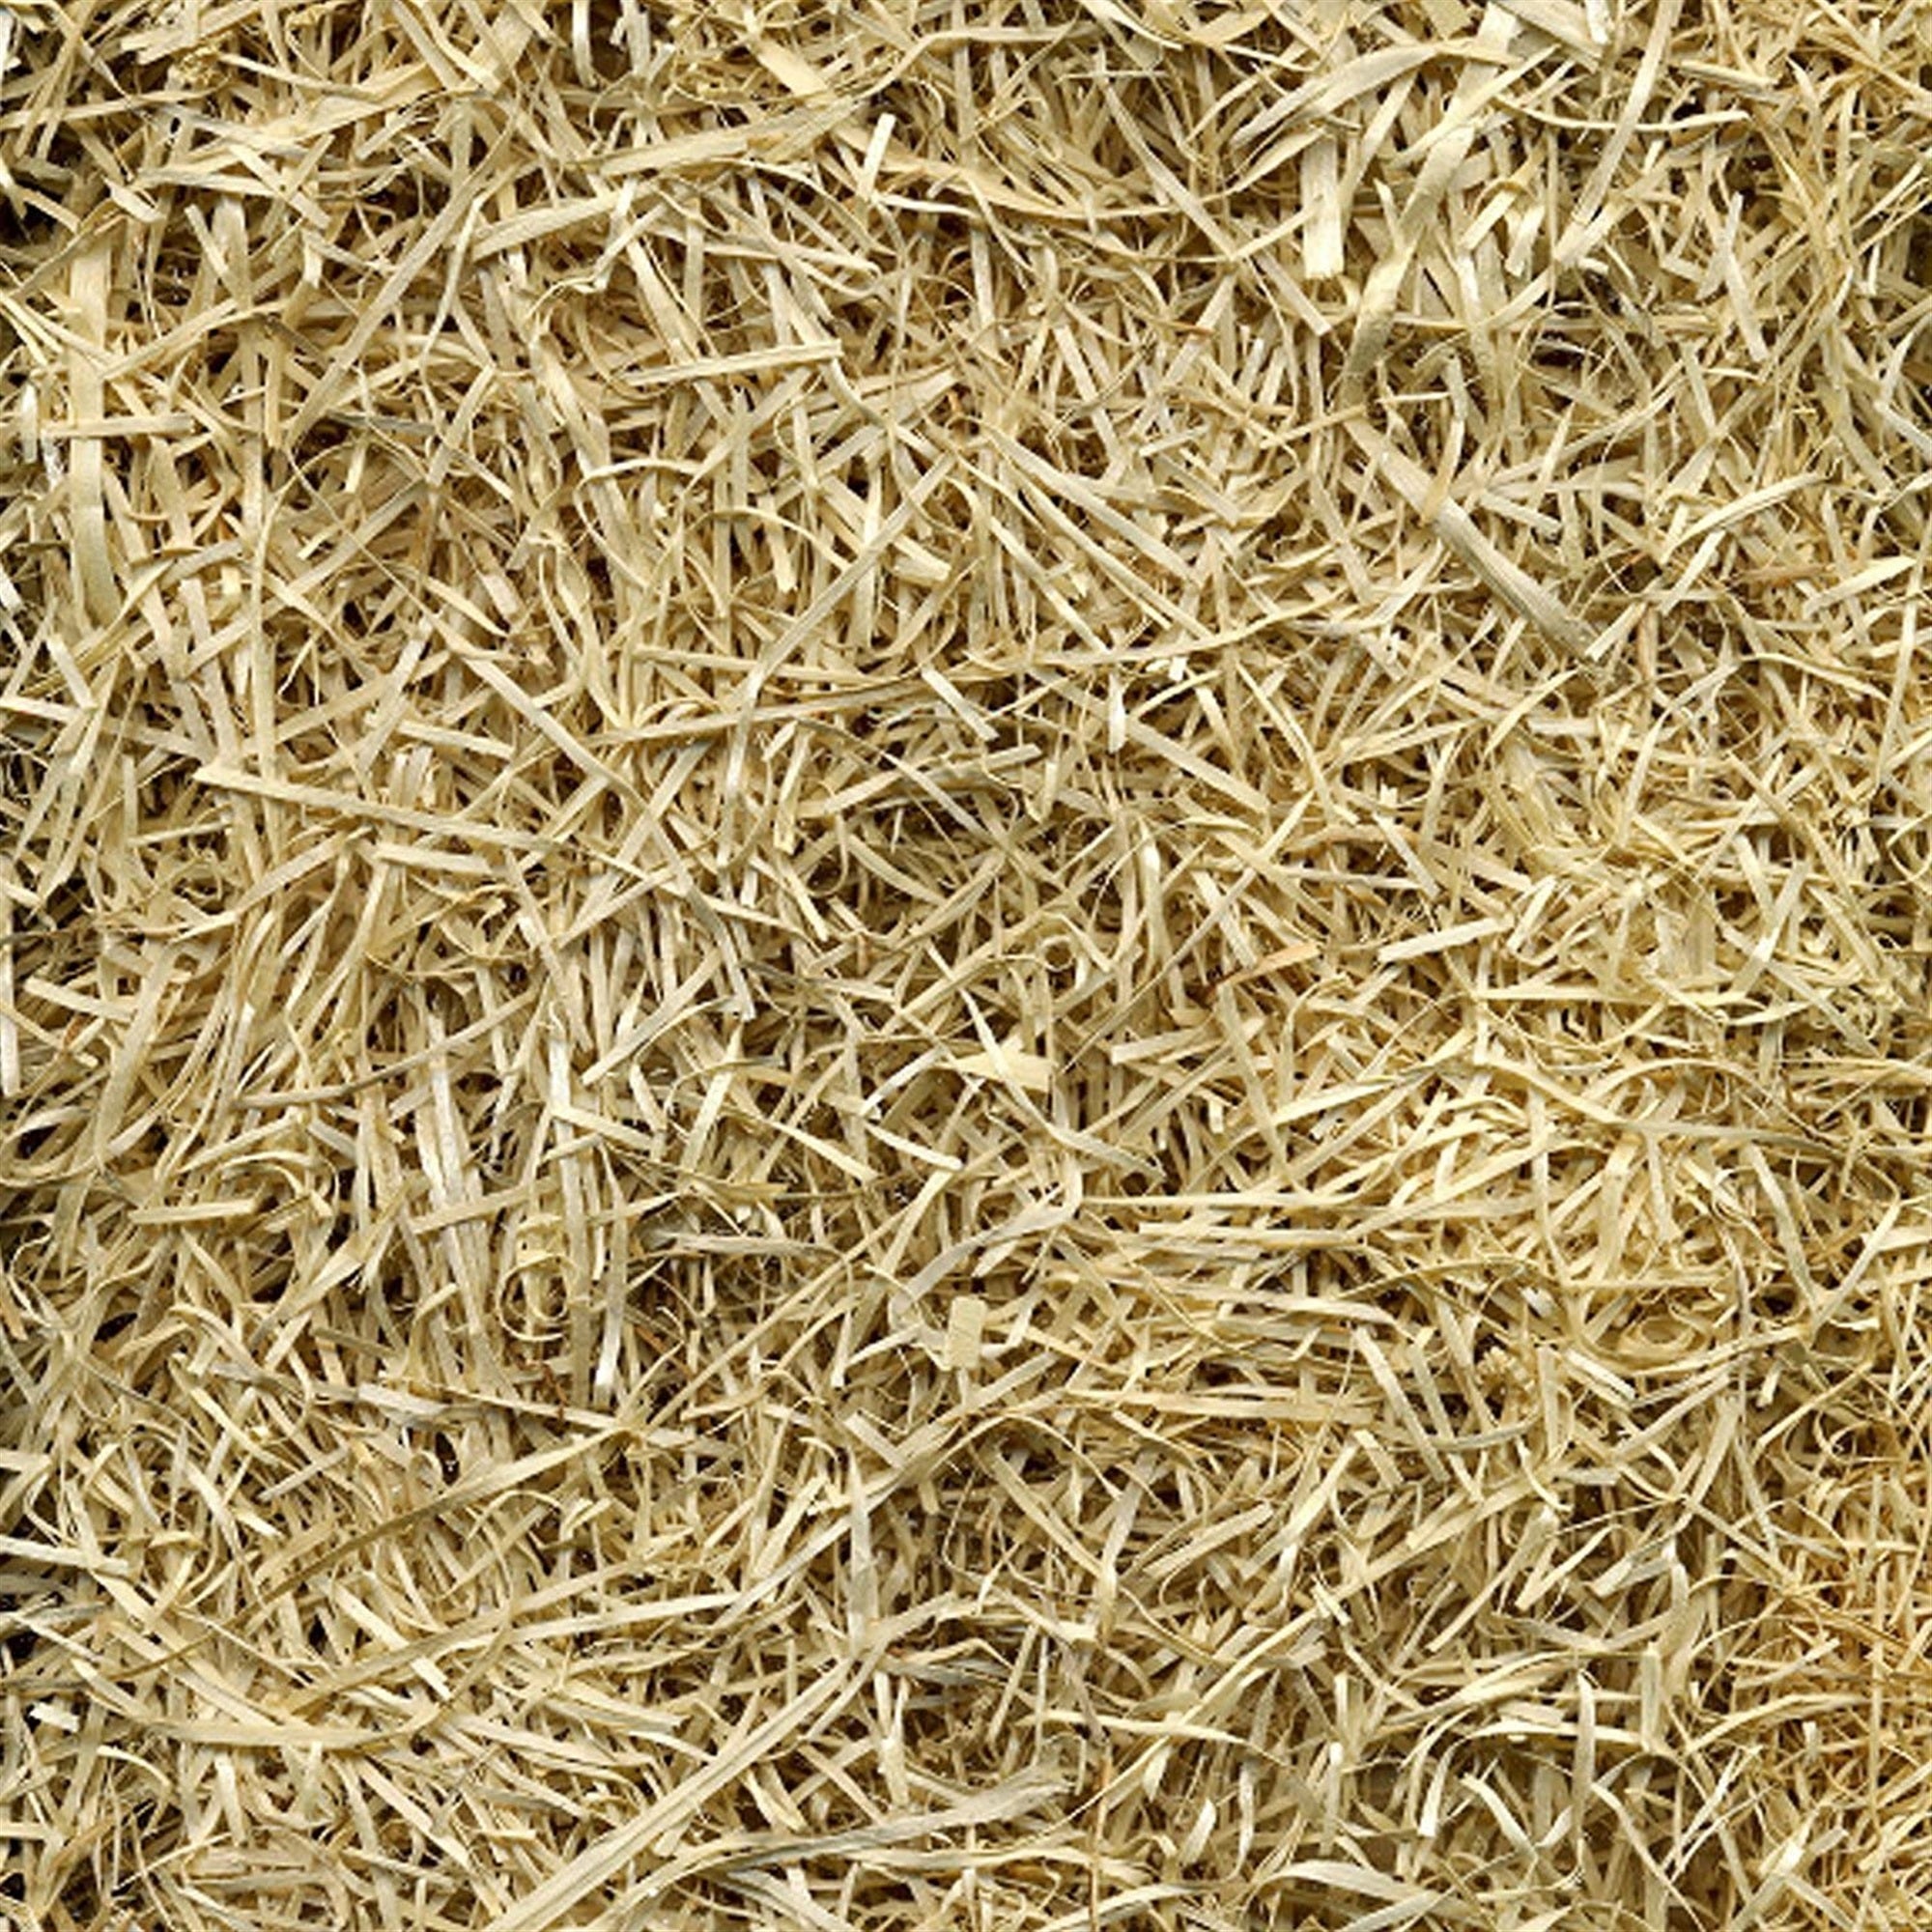 EZ Straw Grass Seed Germination and Erosion Control Blanket, 4ft. x 50ft. (200 sq ft)